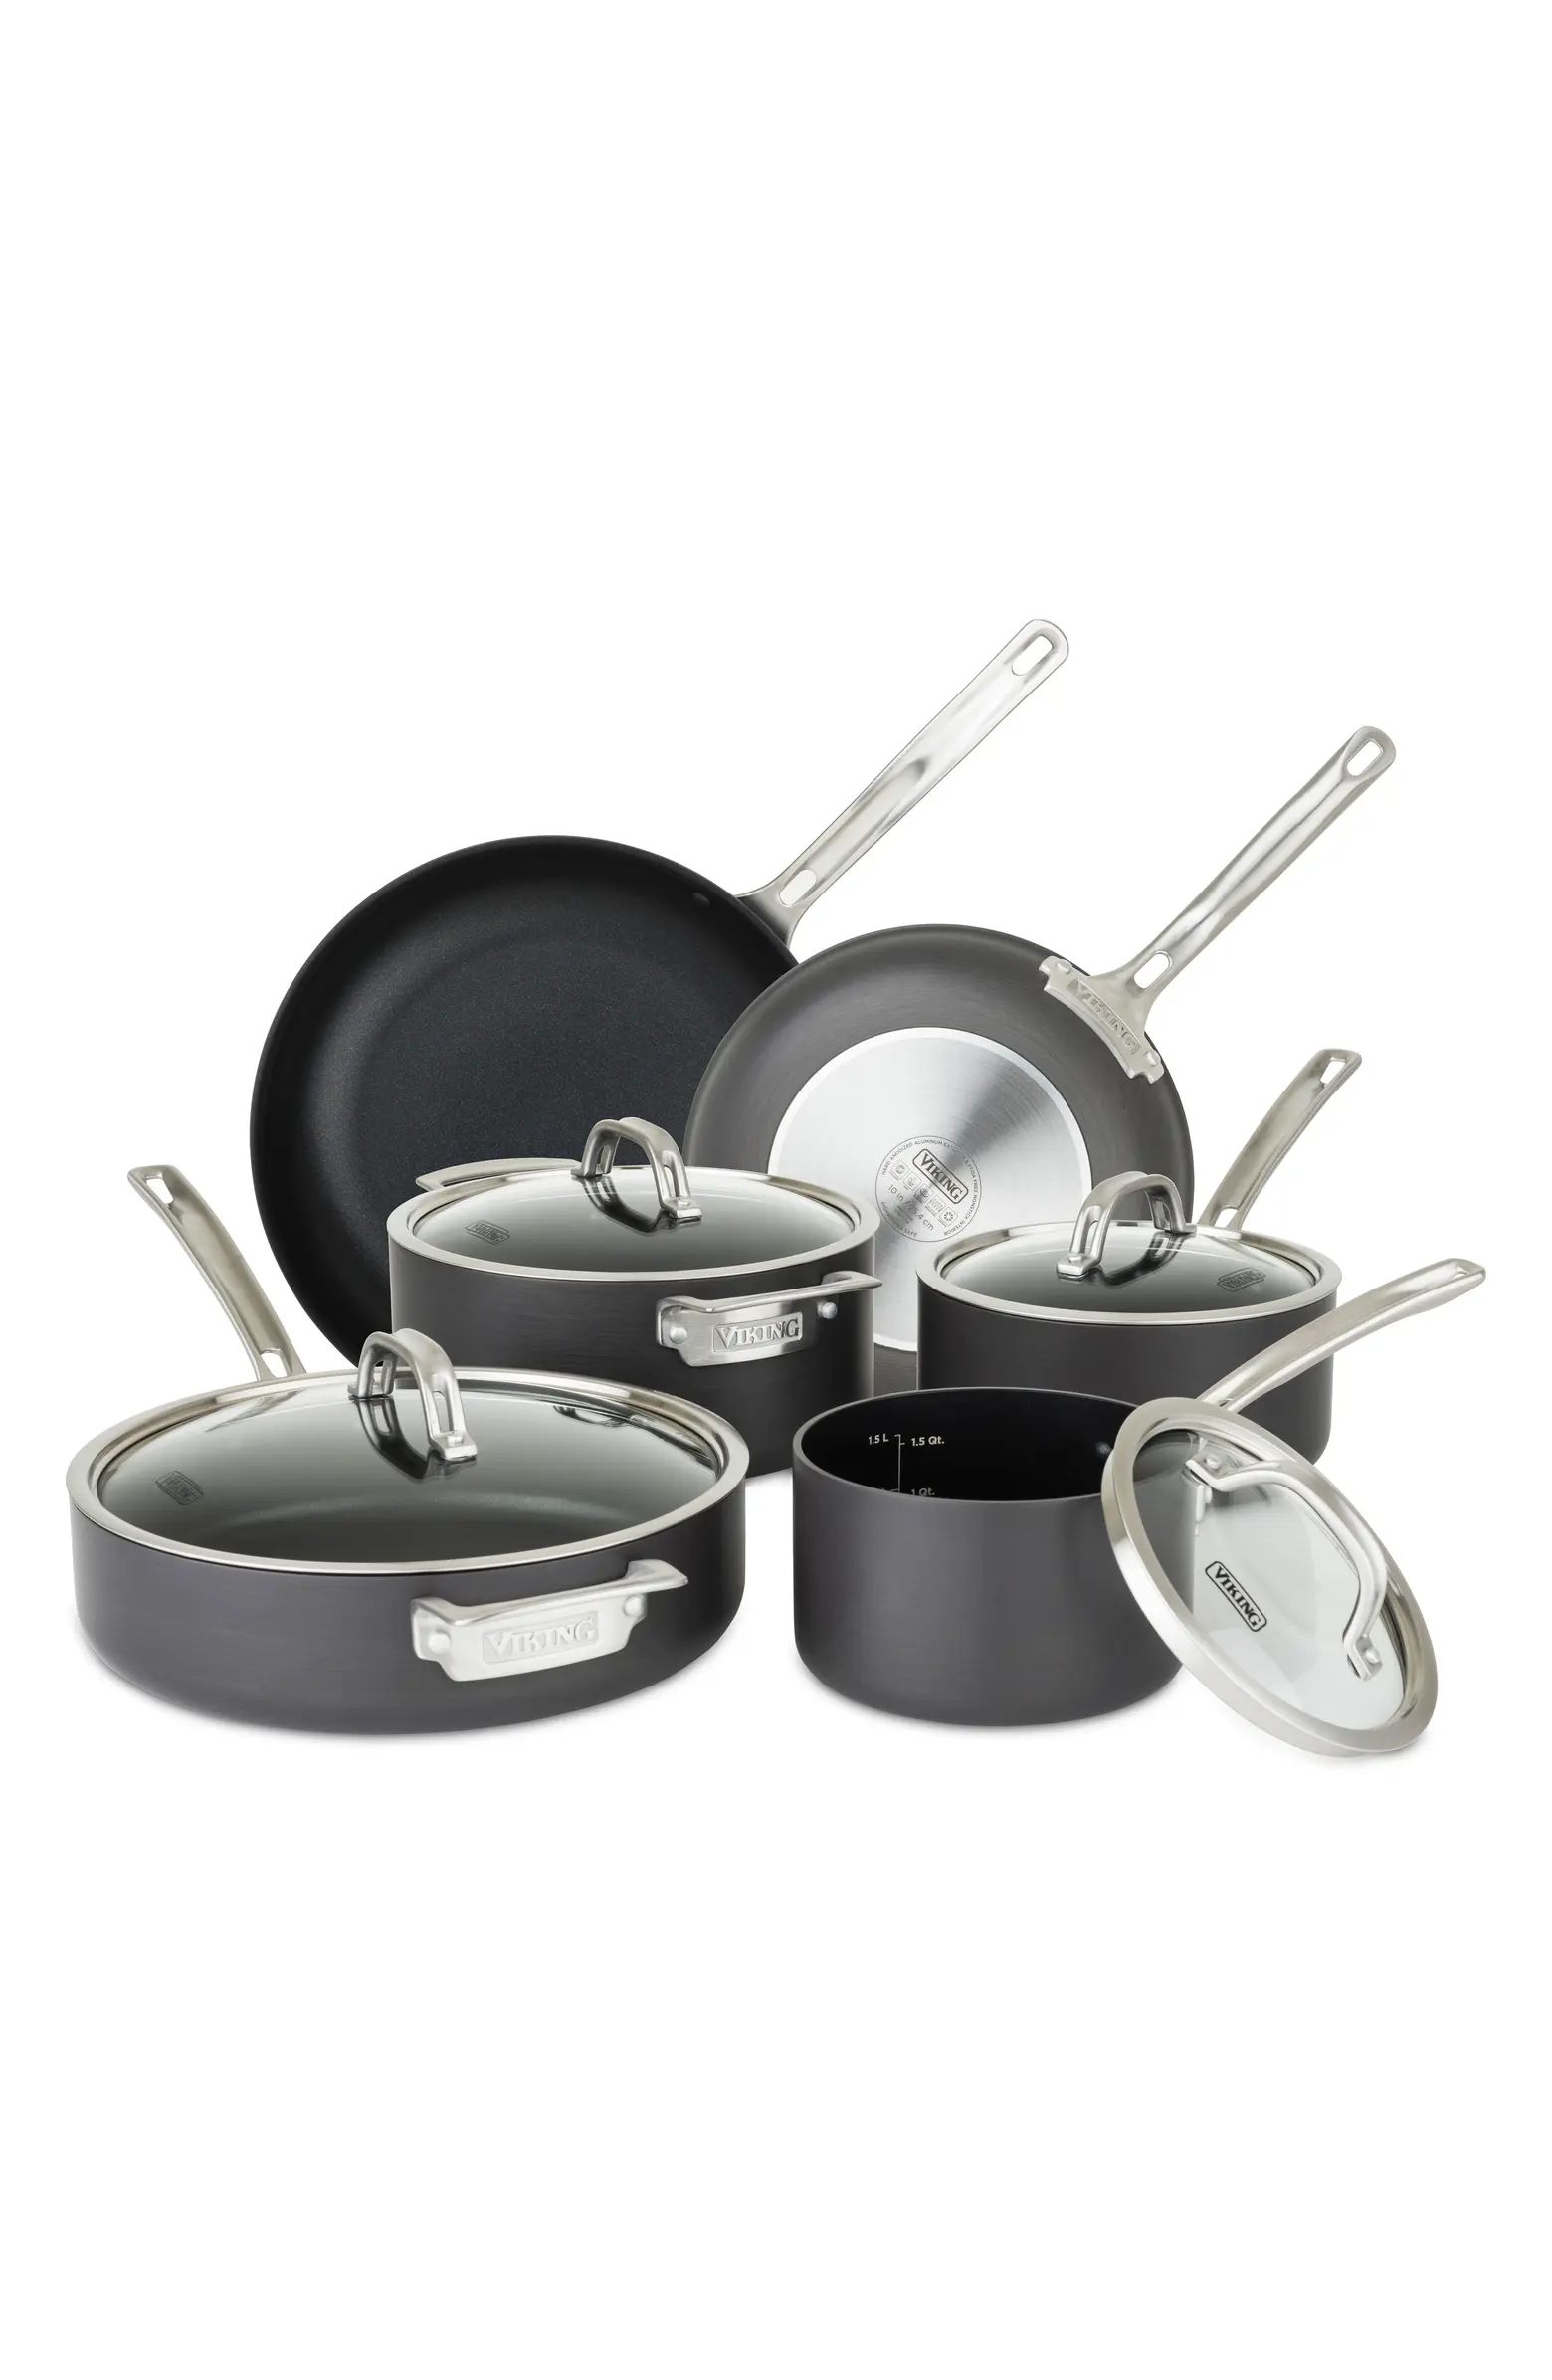 10-Piece Hard Anodized Nonstick Cookware Set | Nordstrom